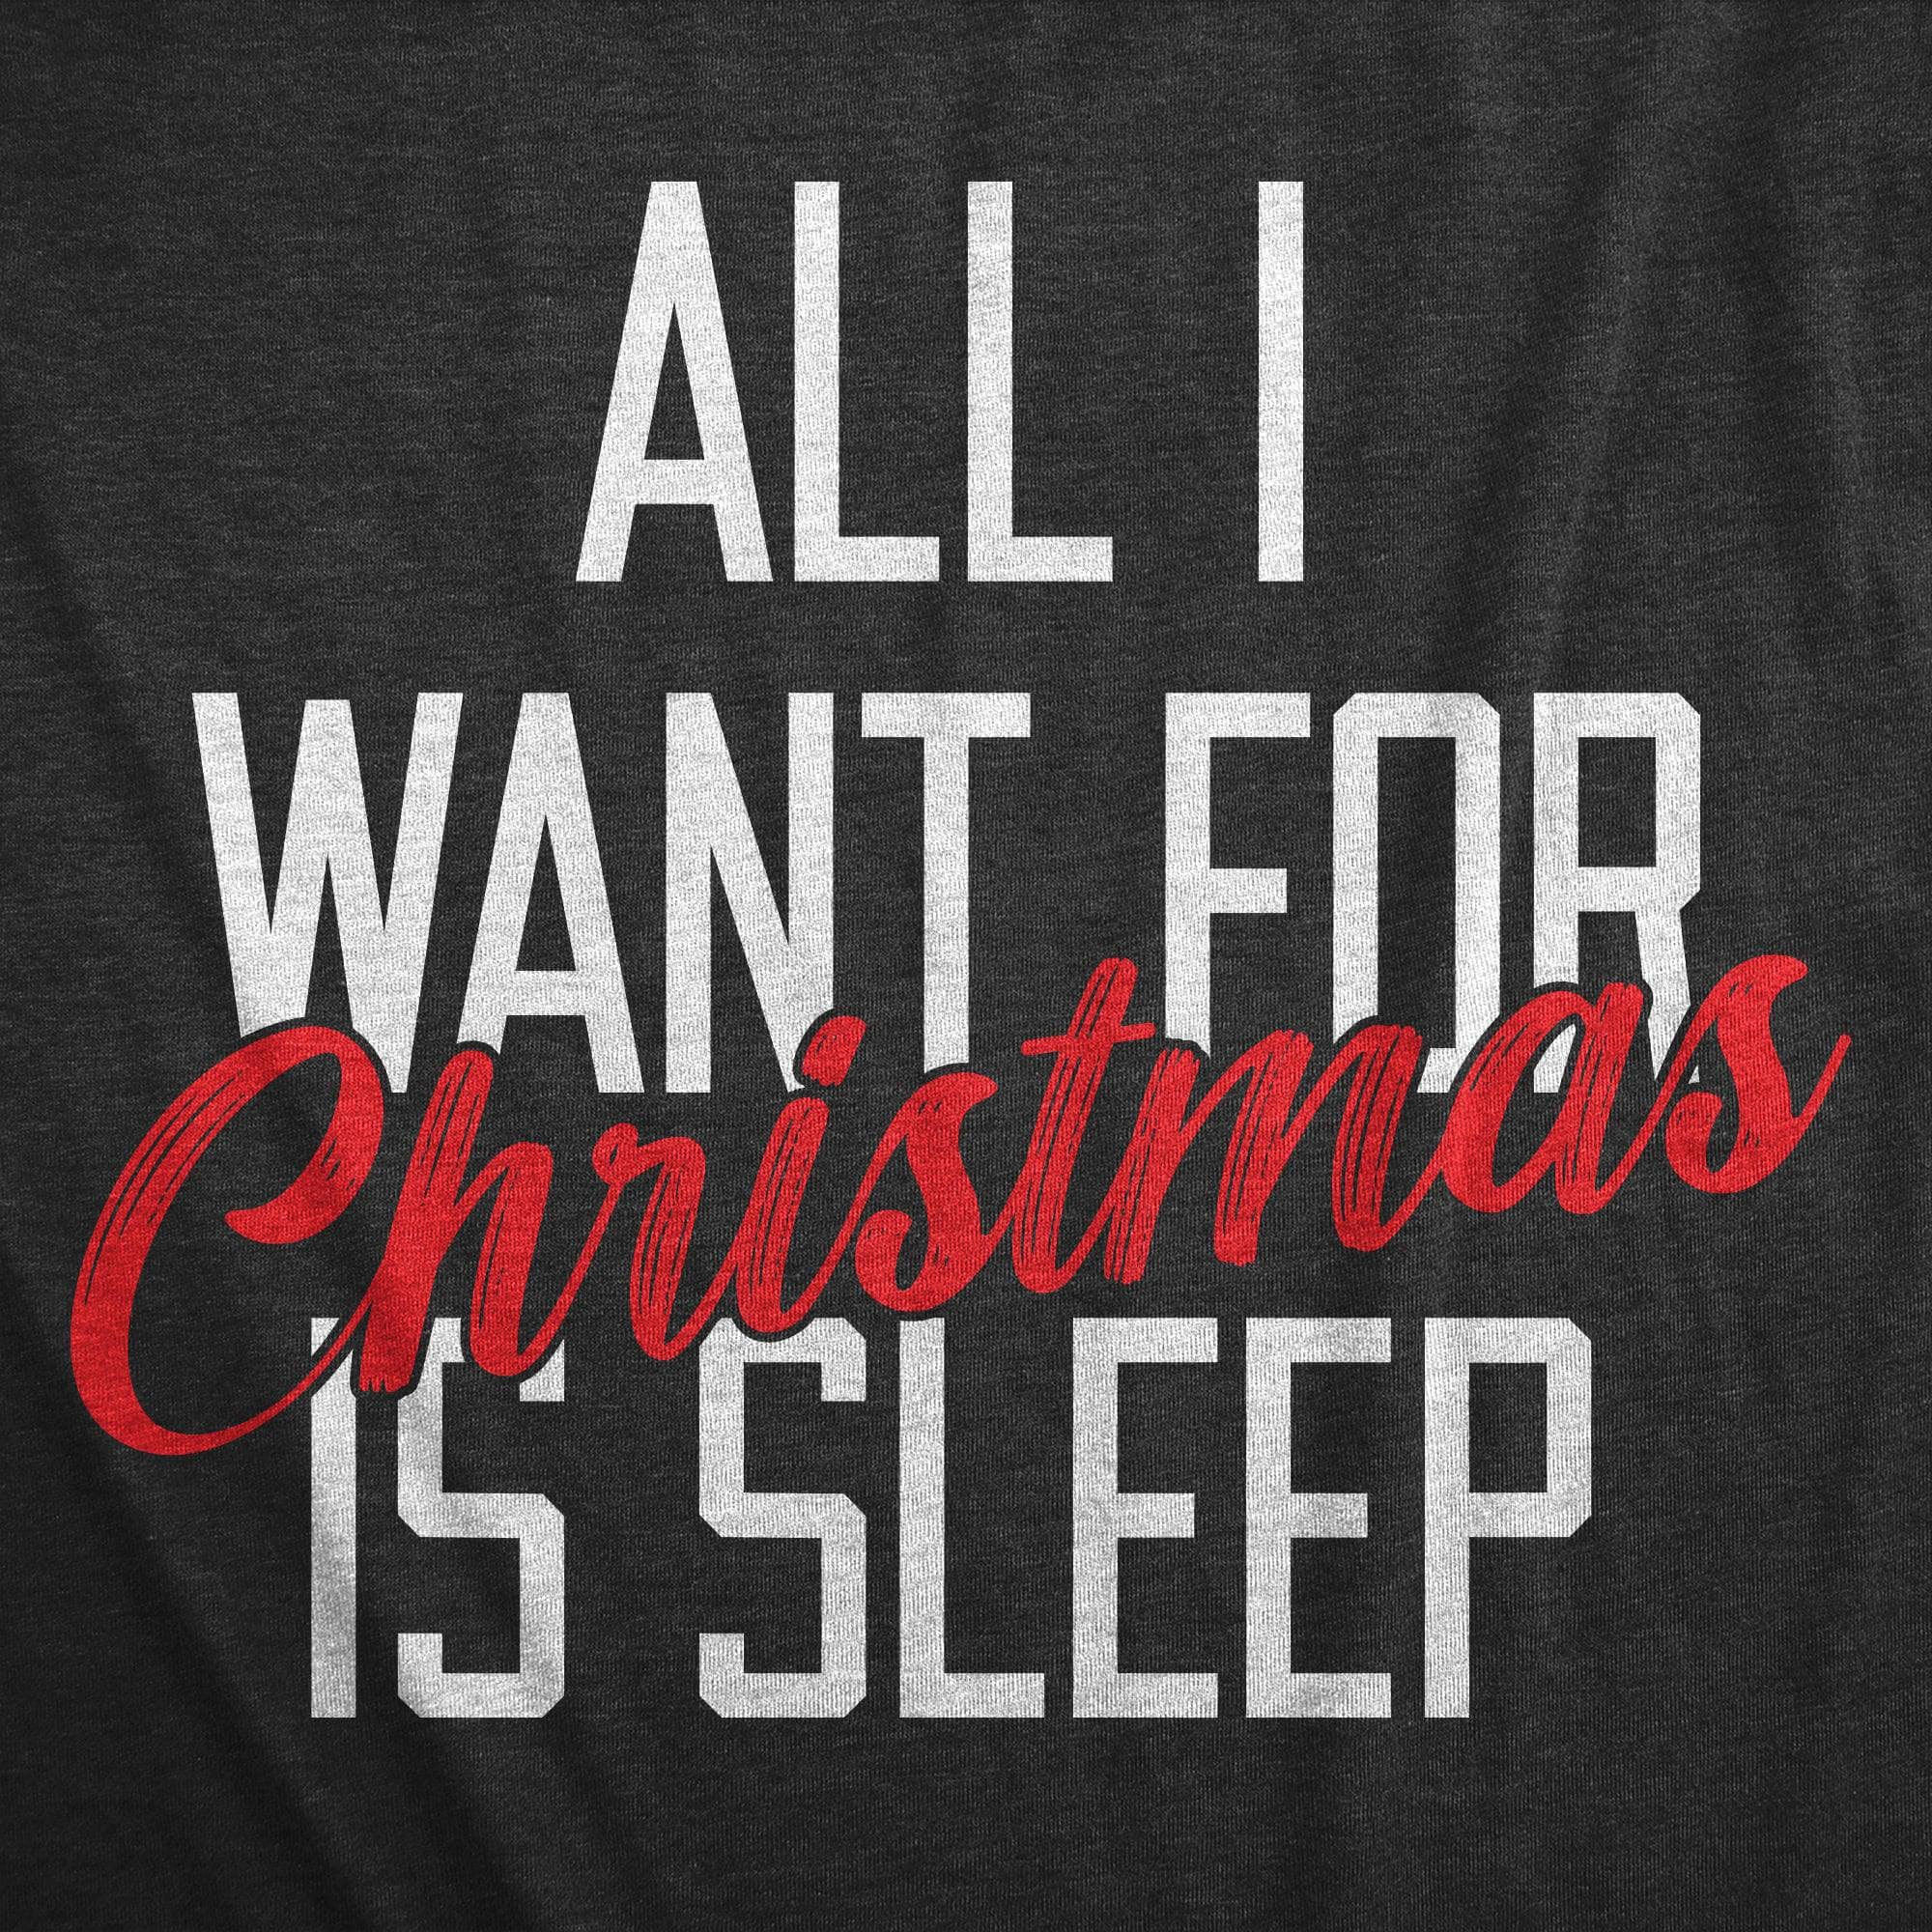 All I Want For Christmas Is Sleep Women's Tshirt  -  Crazy Dog T-Shirts